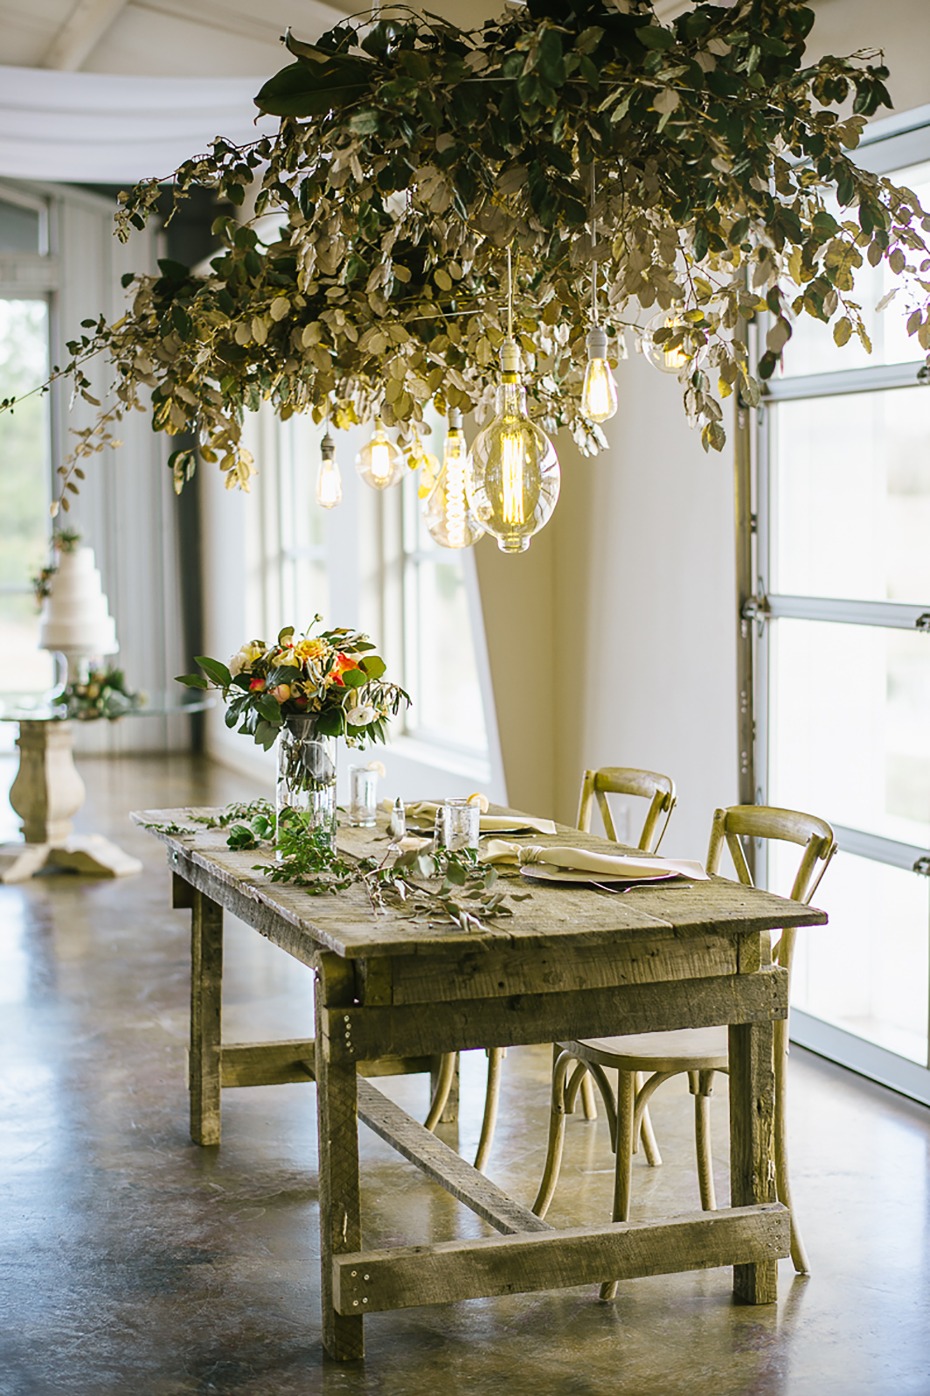 Sweetheart table with greenery and hanging bulbs